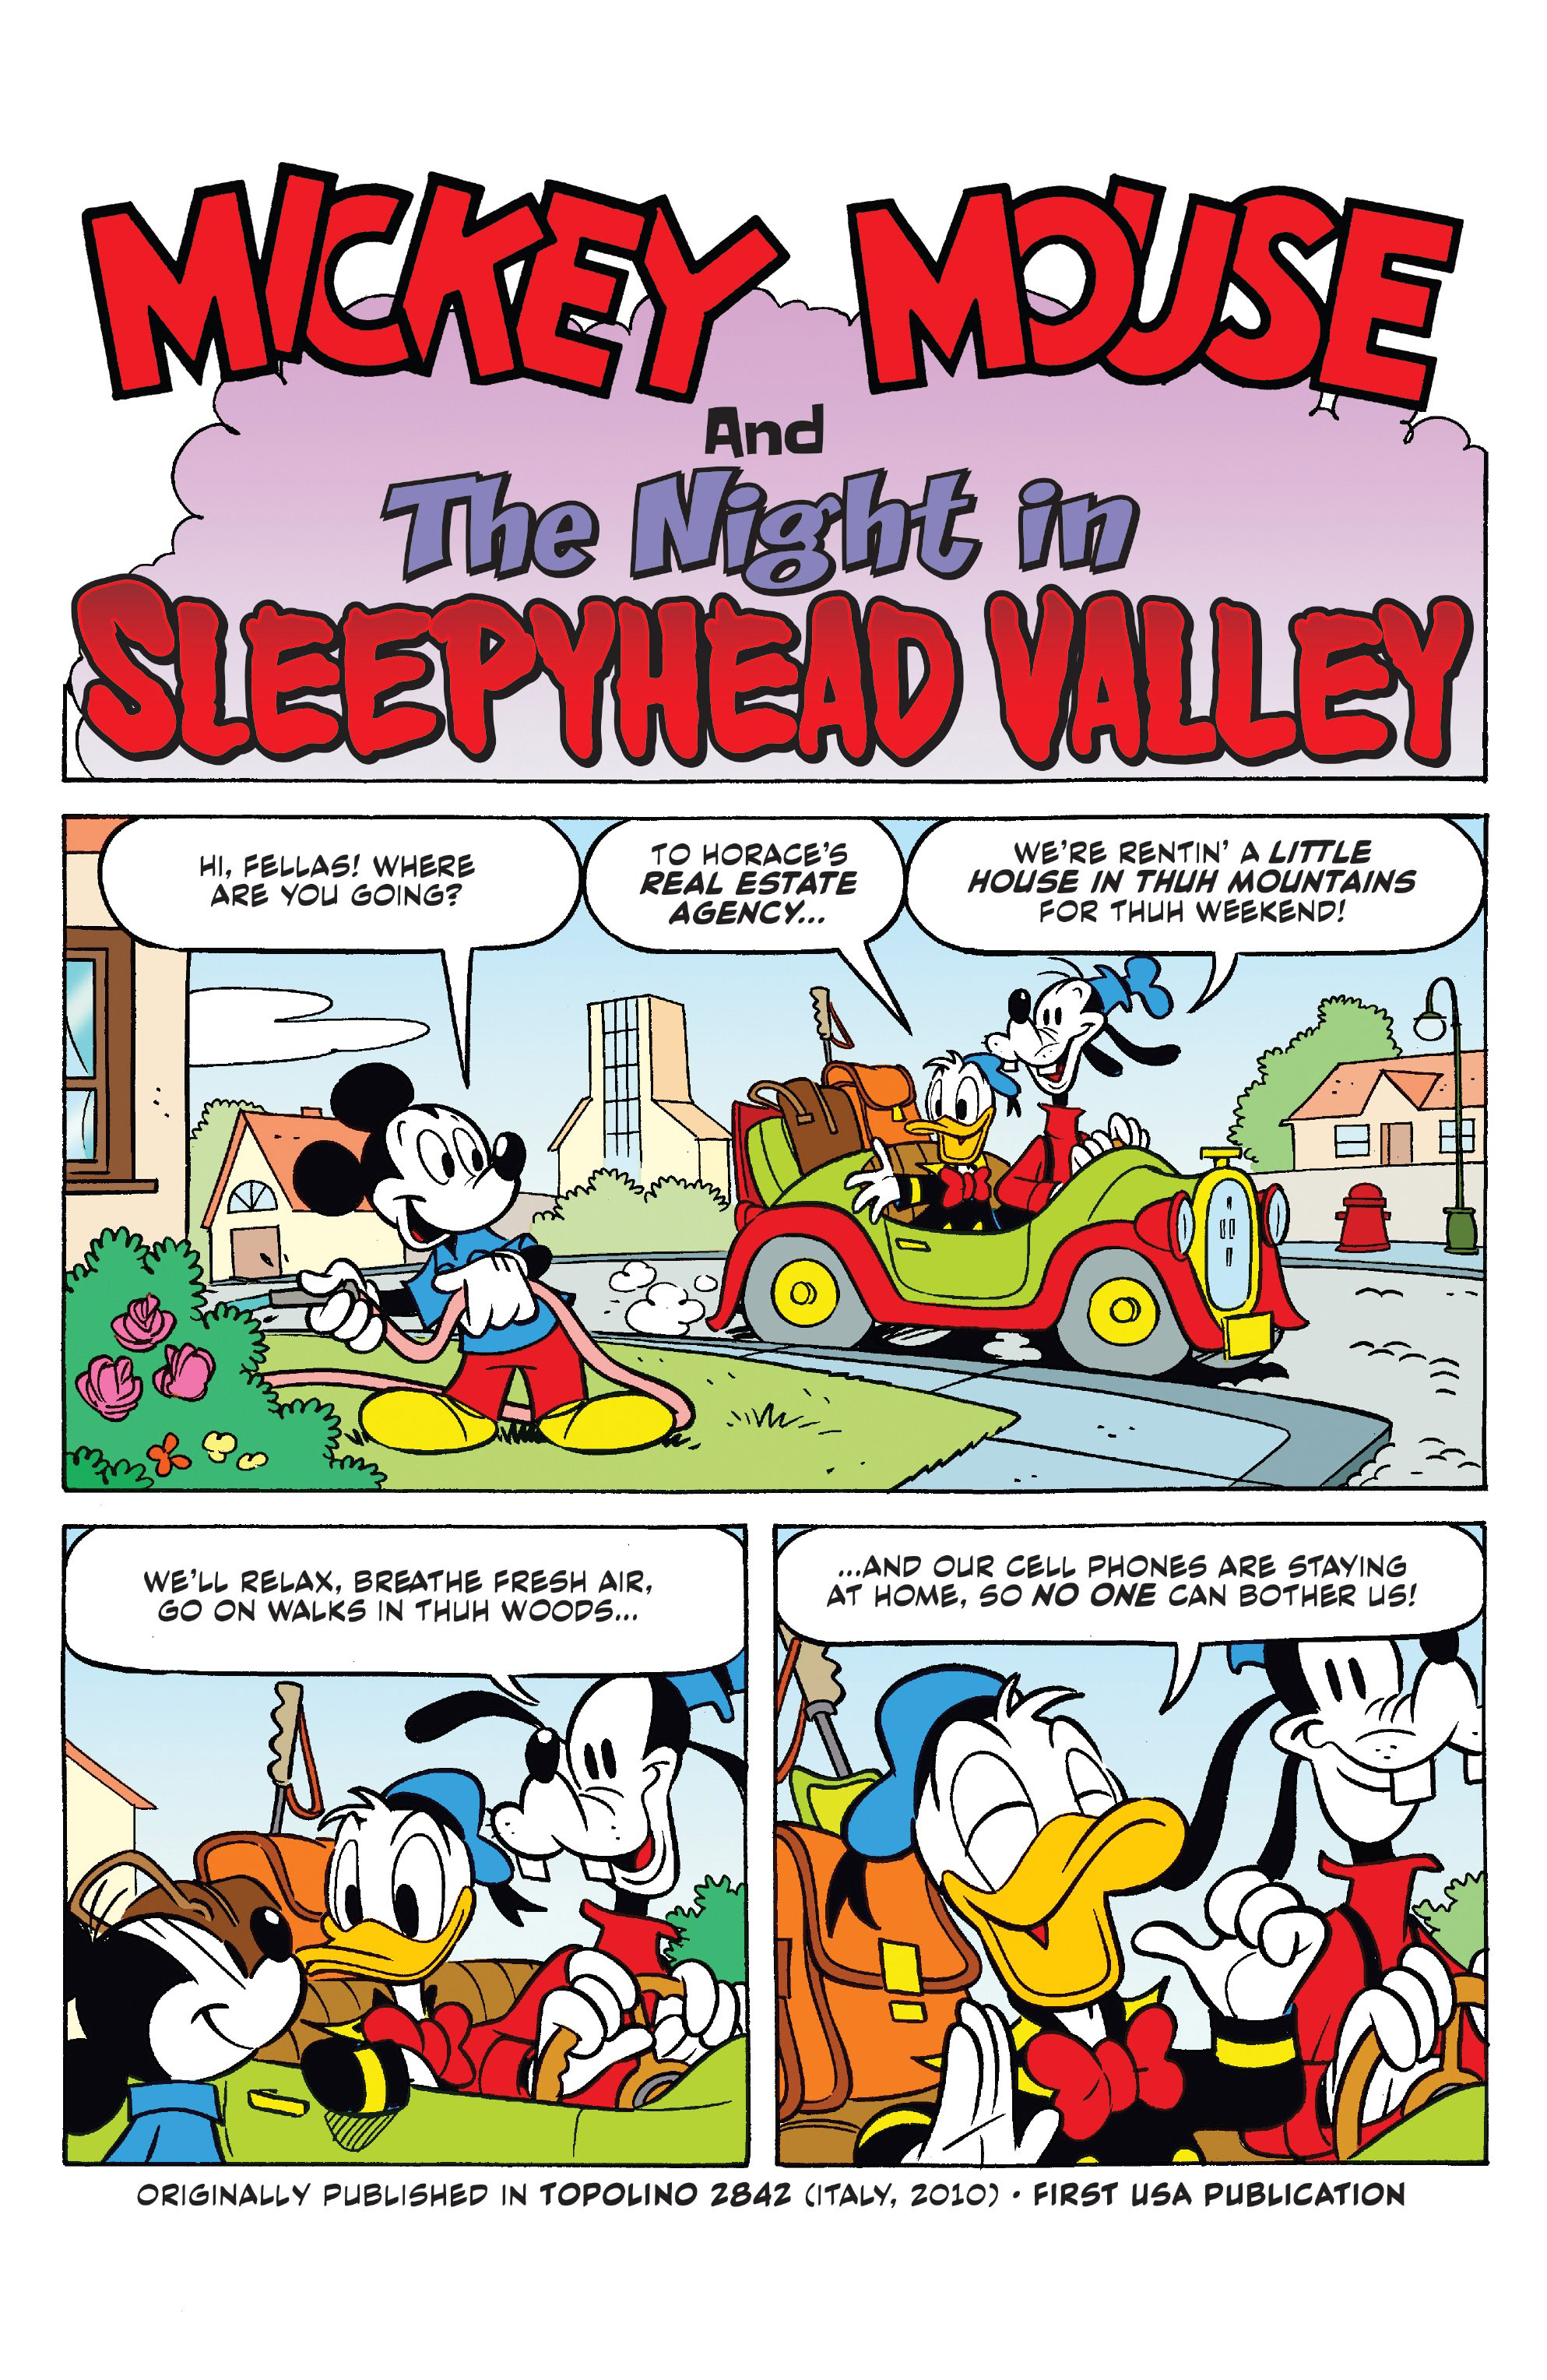 Disney Comics and Stories (2018-): Chapter 3 - Page 3